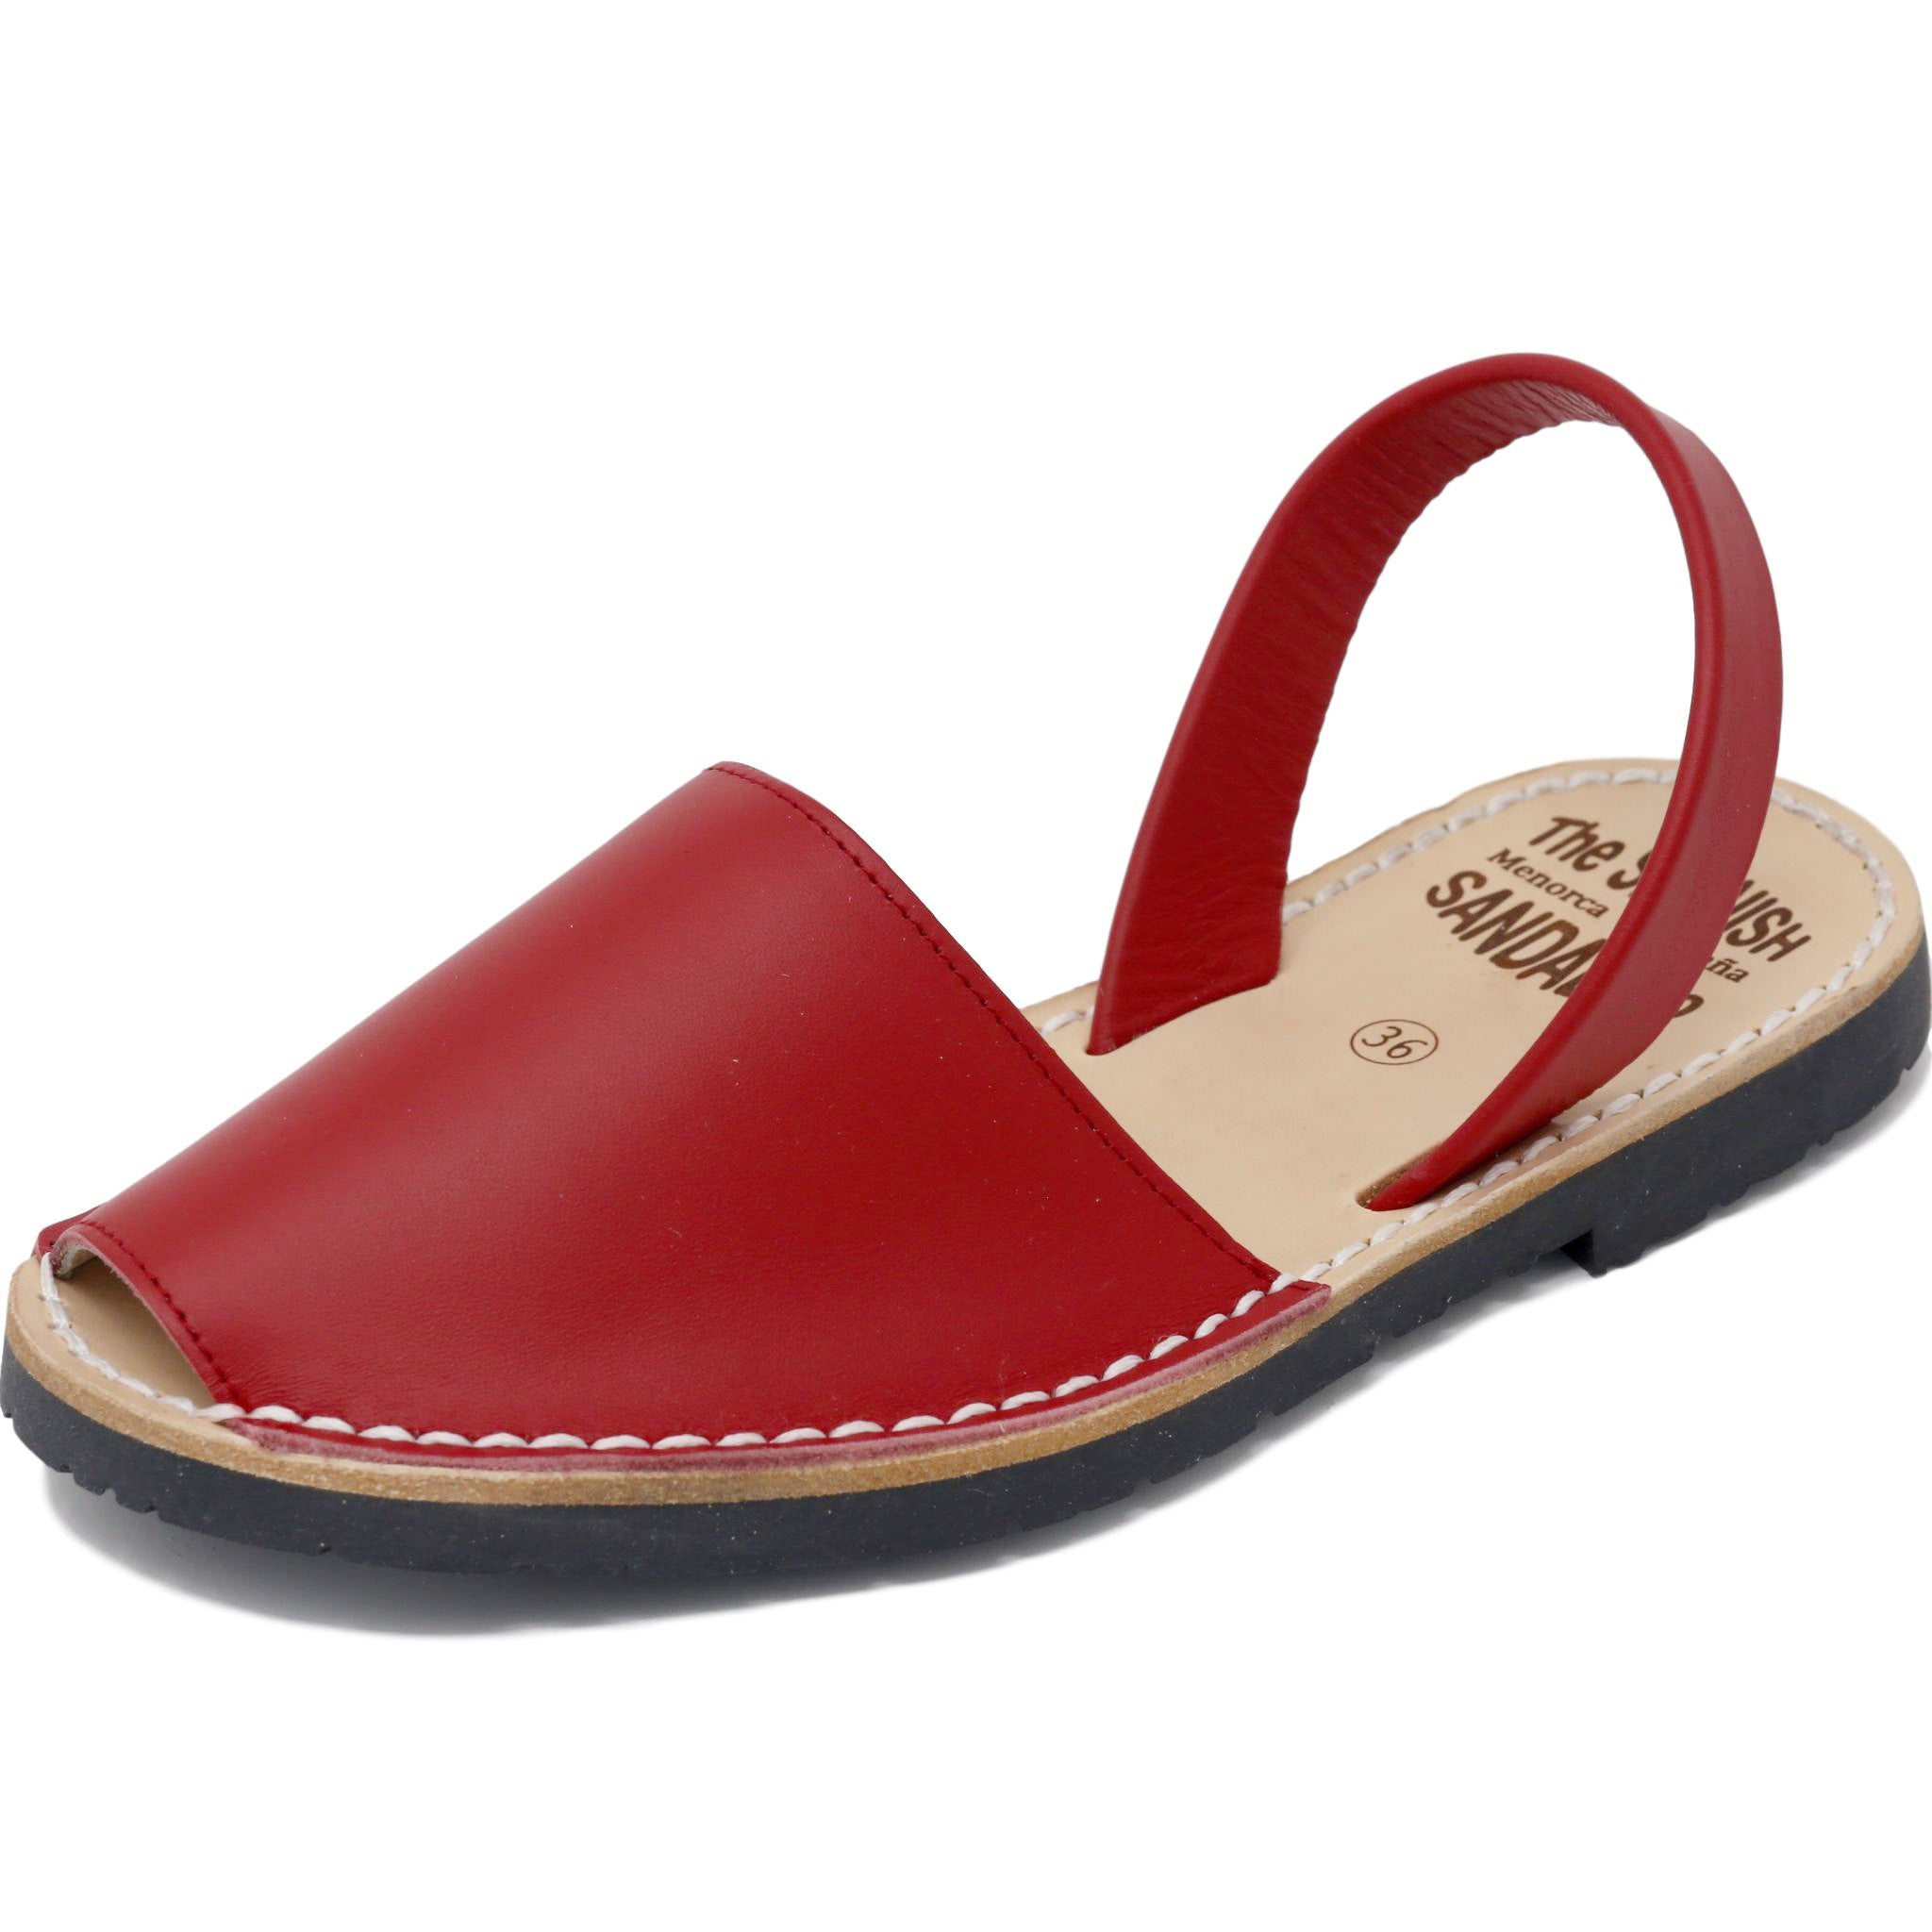 Classic red sandals  - diagonal view